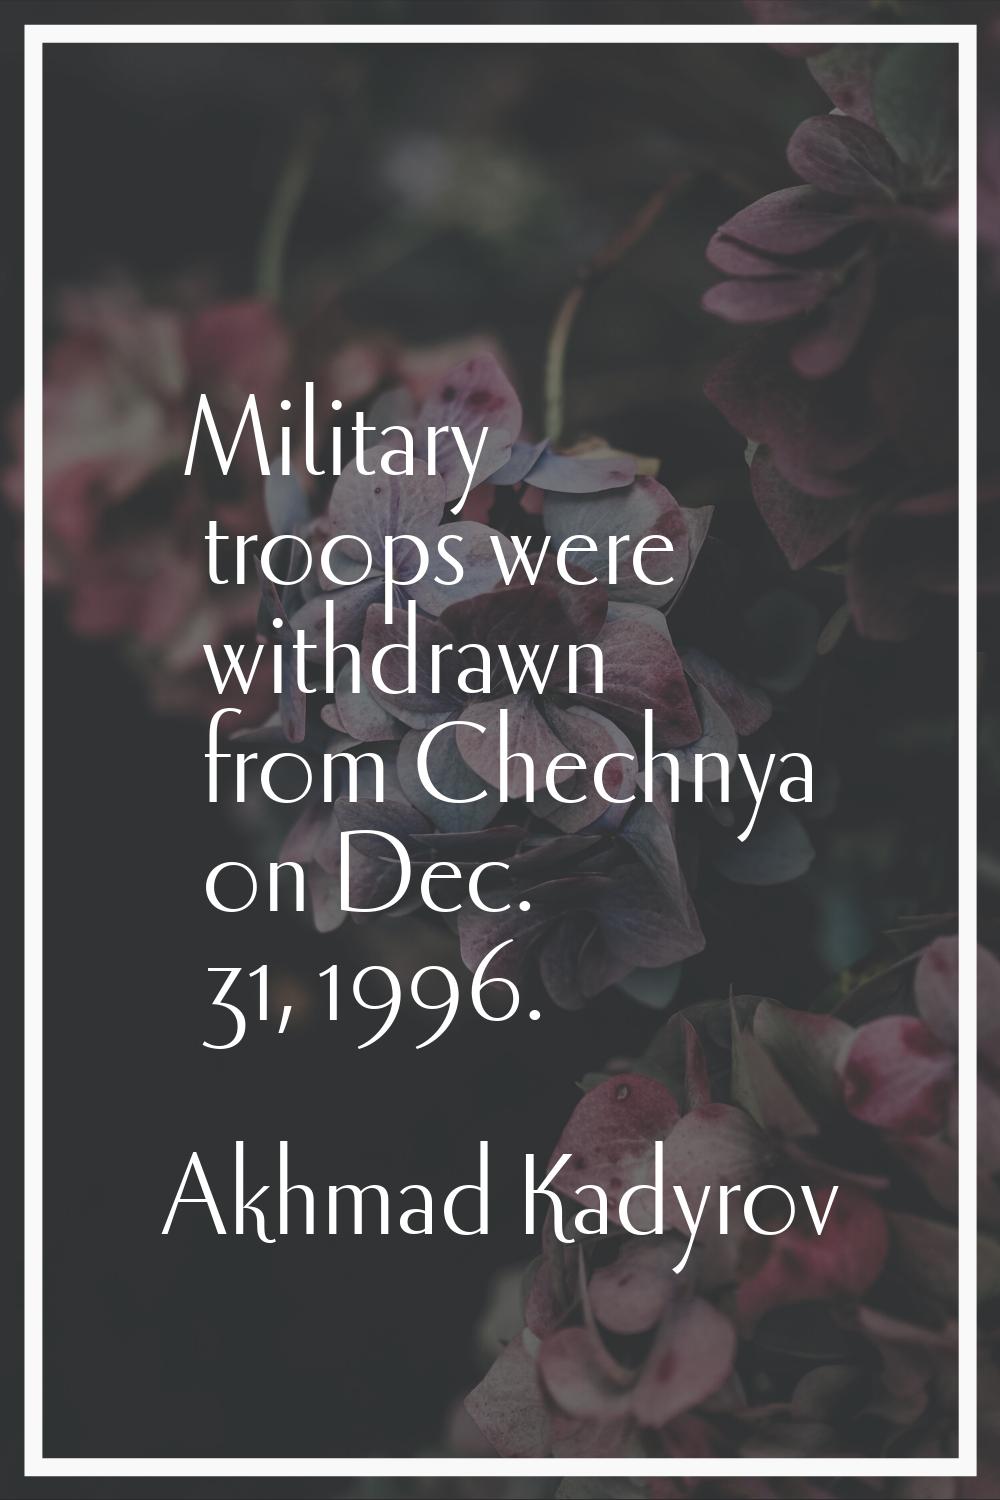 Military troops were withdrawn from Chechnya on Dec. 31, 1996.